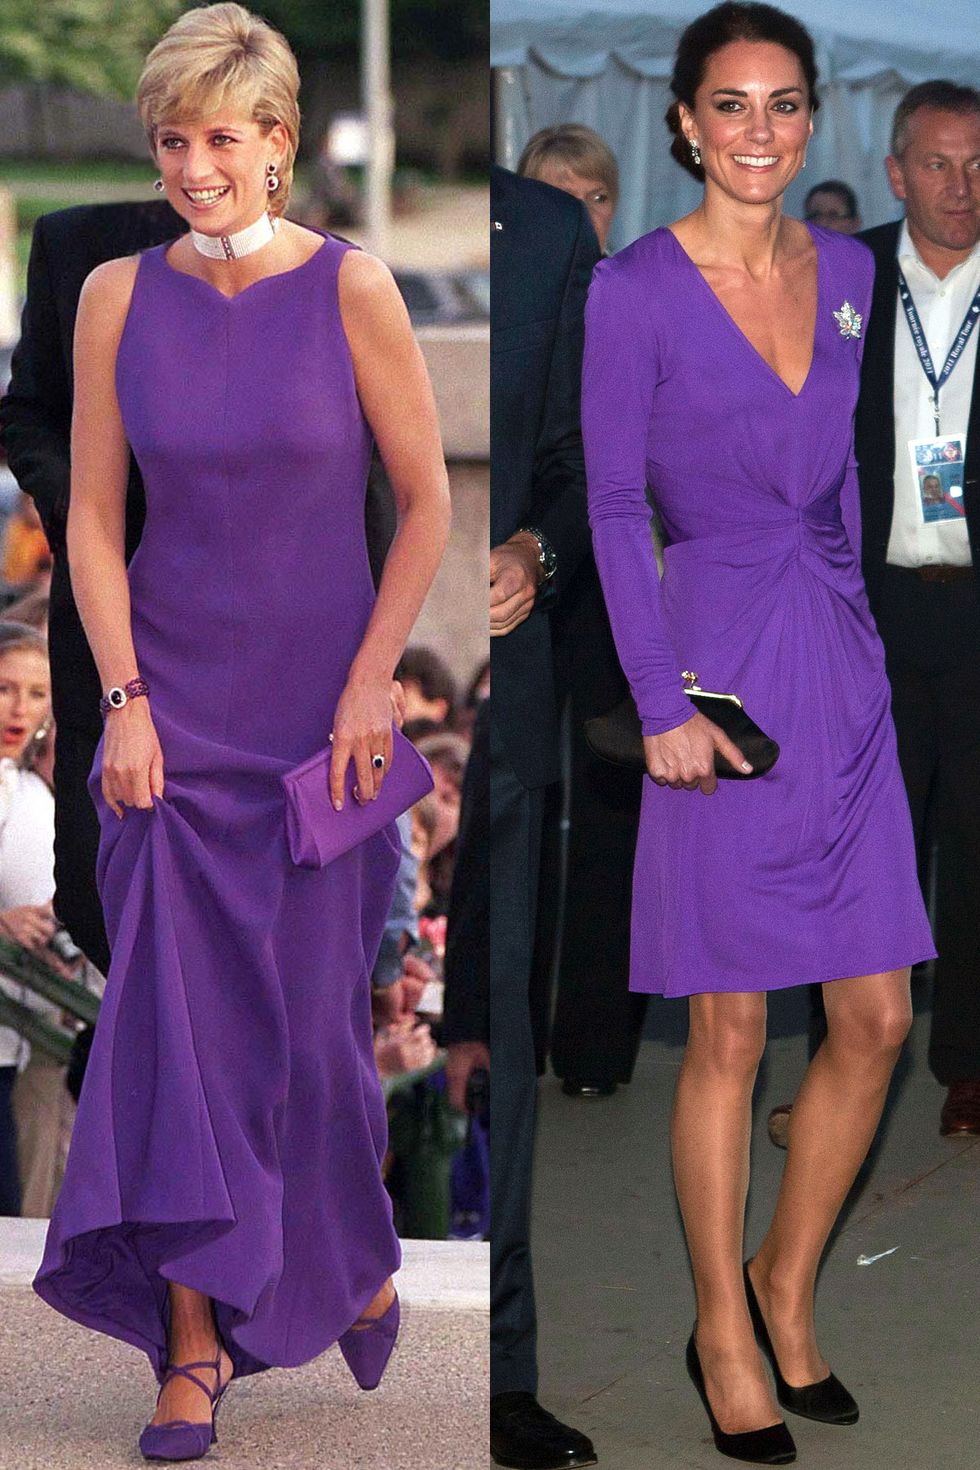 Diana in Versace at a dinner at the Field Museum of Natural History in Chicago in June 1996; Kate celebrates Canada Day in an Issa dress during the Royal Tour of North America in July 2011.